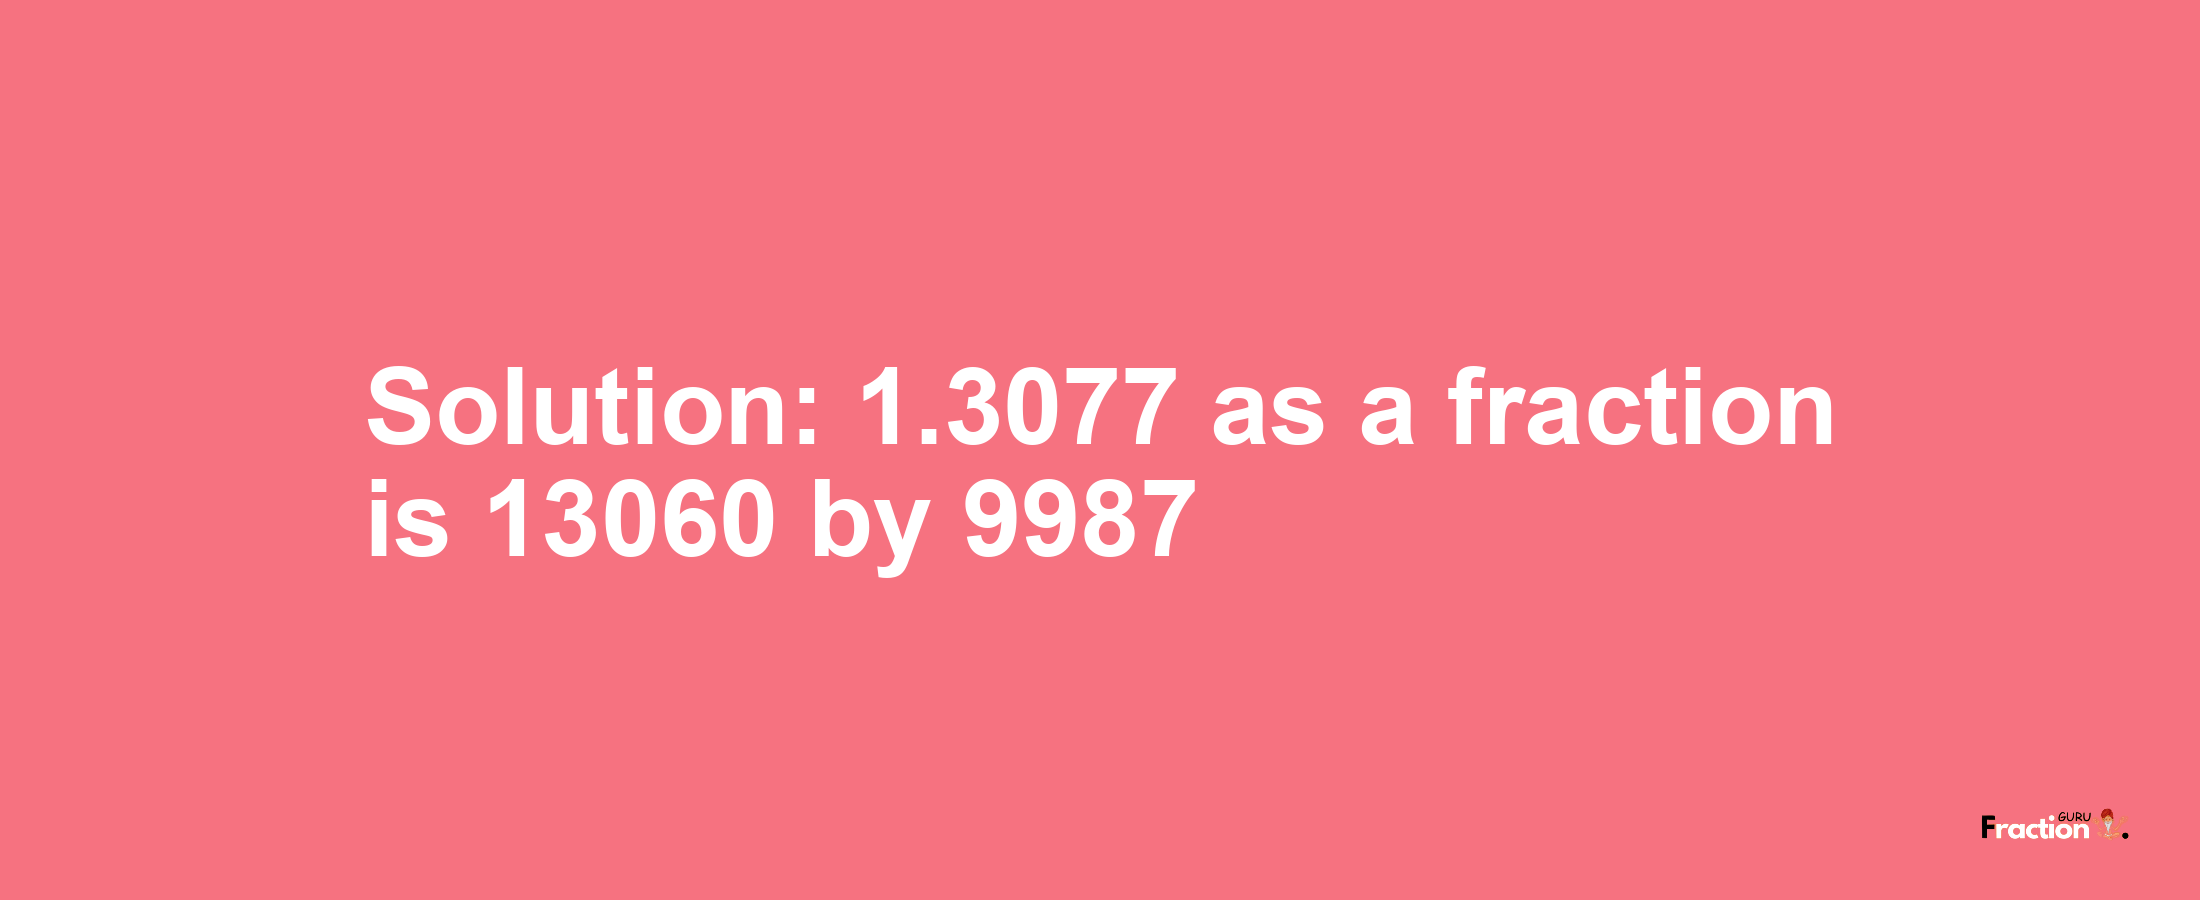 Solution:1.3077 as a fraction is 13060/9987